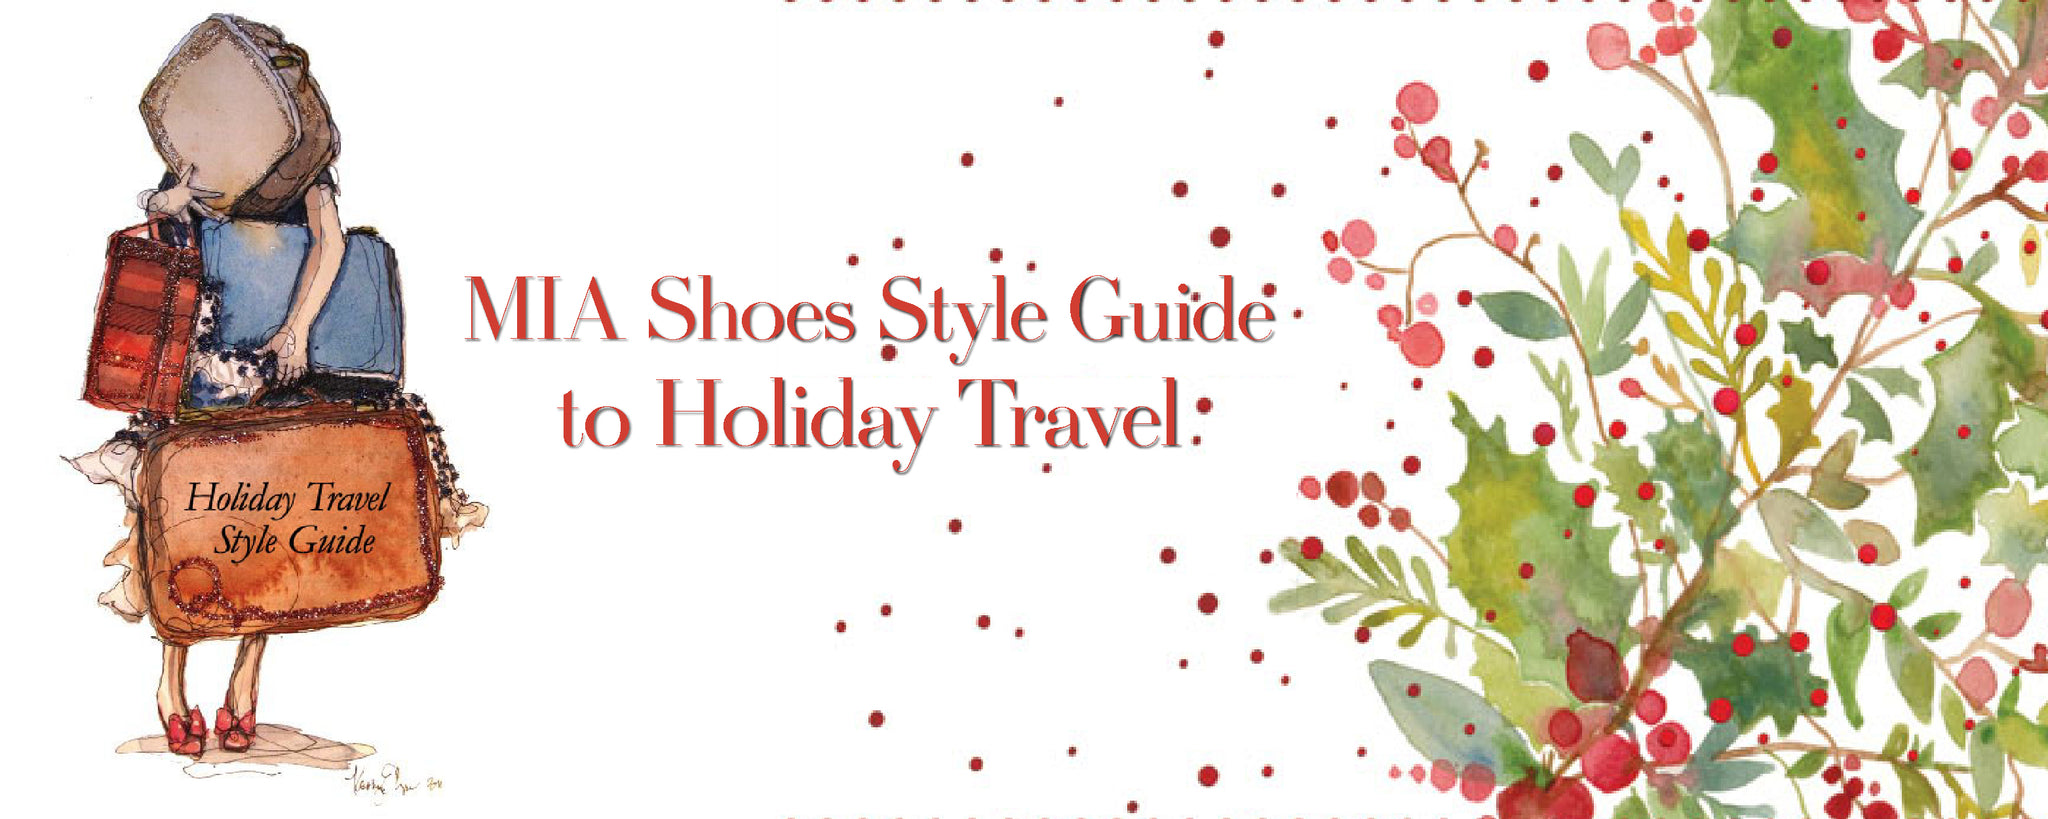 December 19, 2014 MIA Shoes Holiday Travel Style Guide